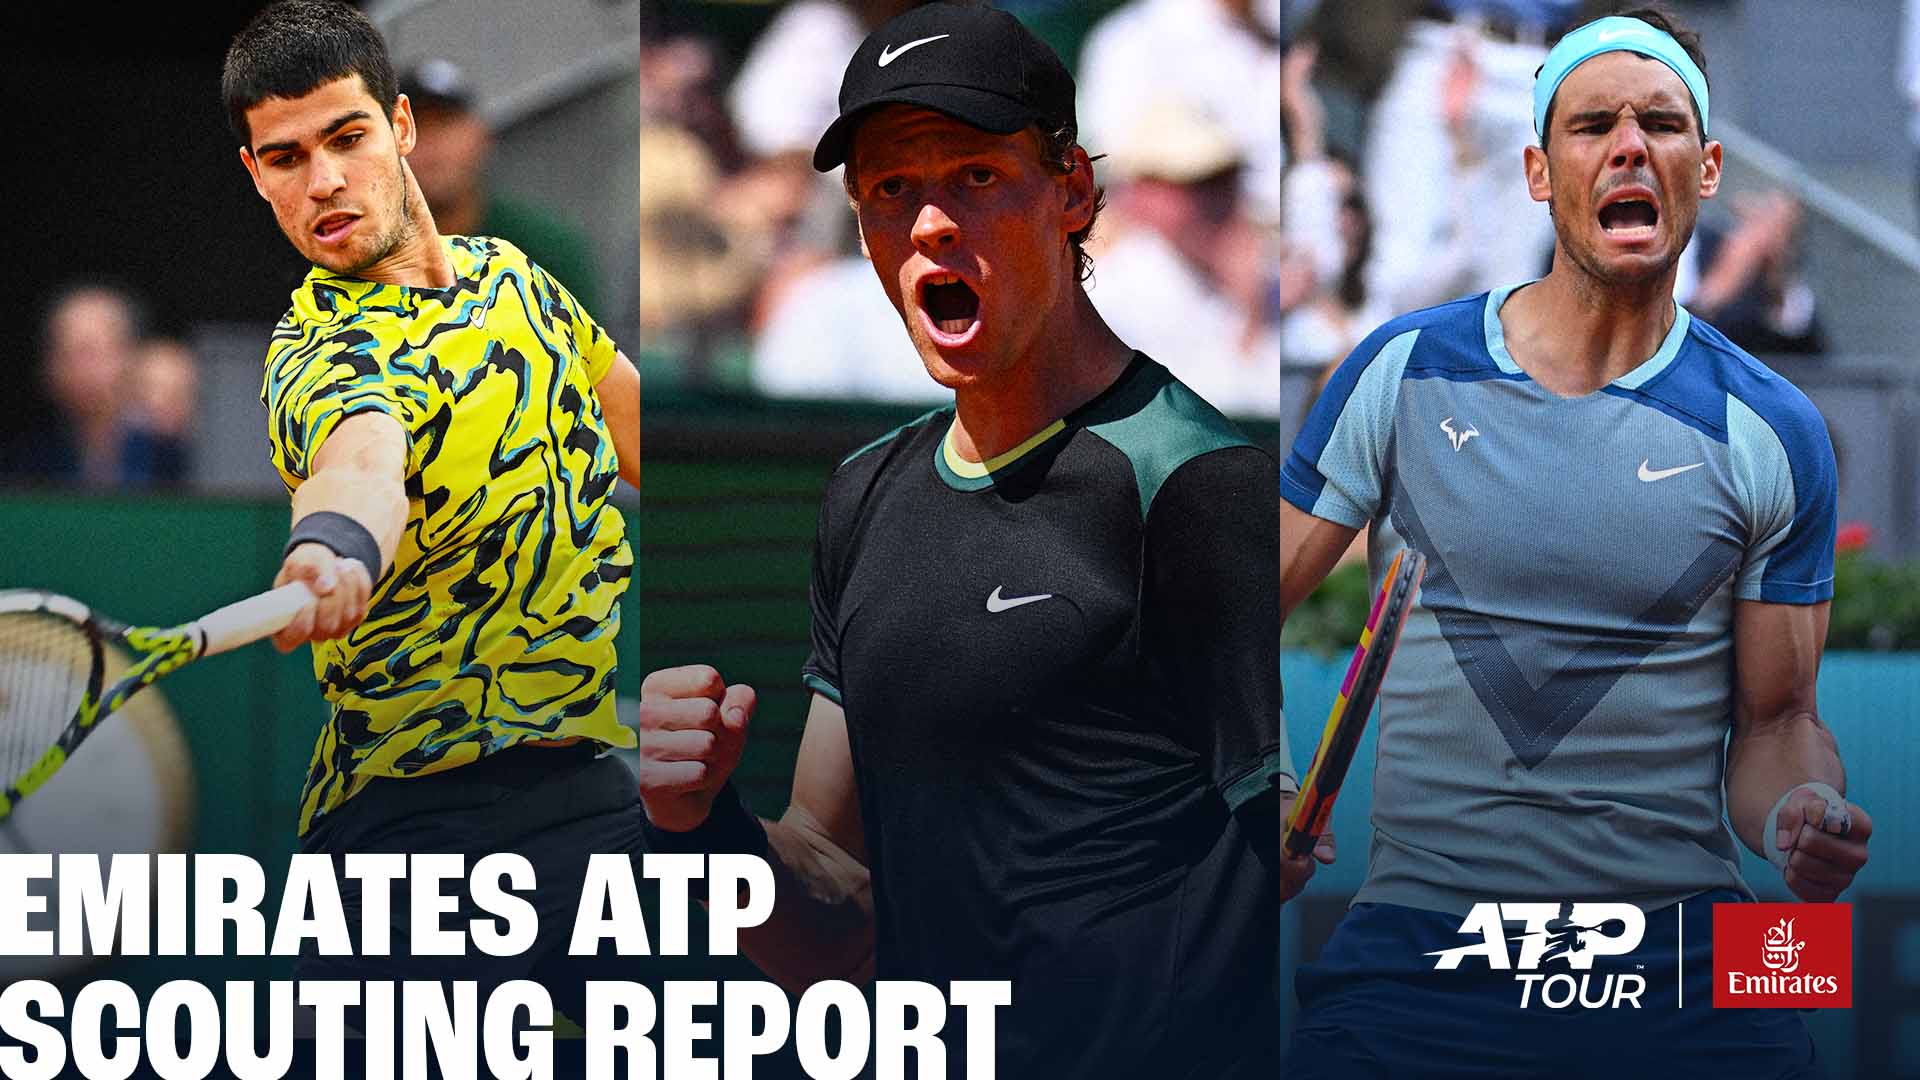 Scouting Report: Two-time champ Alcaraz defends Madrid title, Sinner & Nadal compete